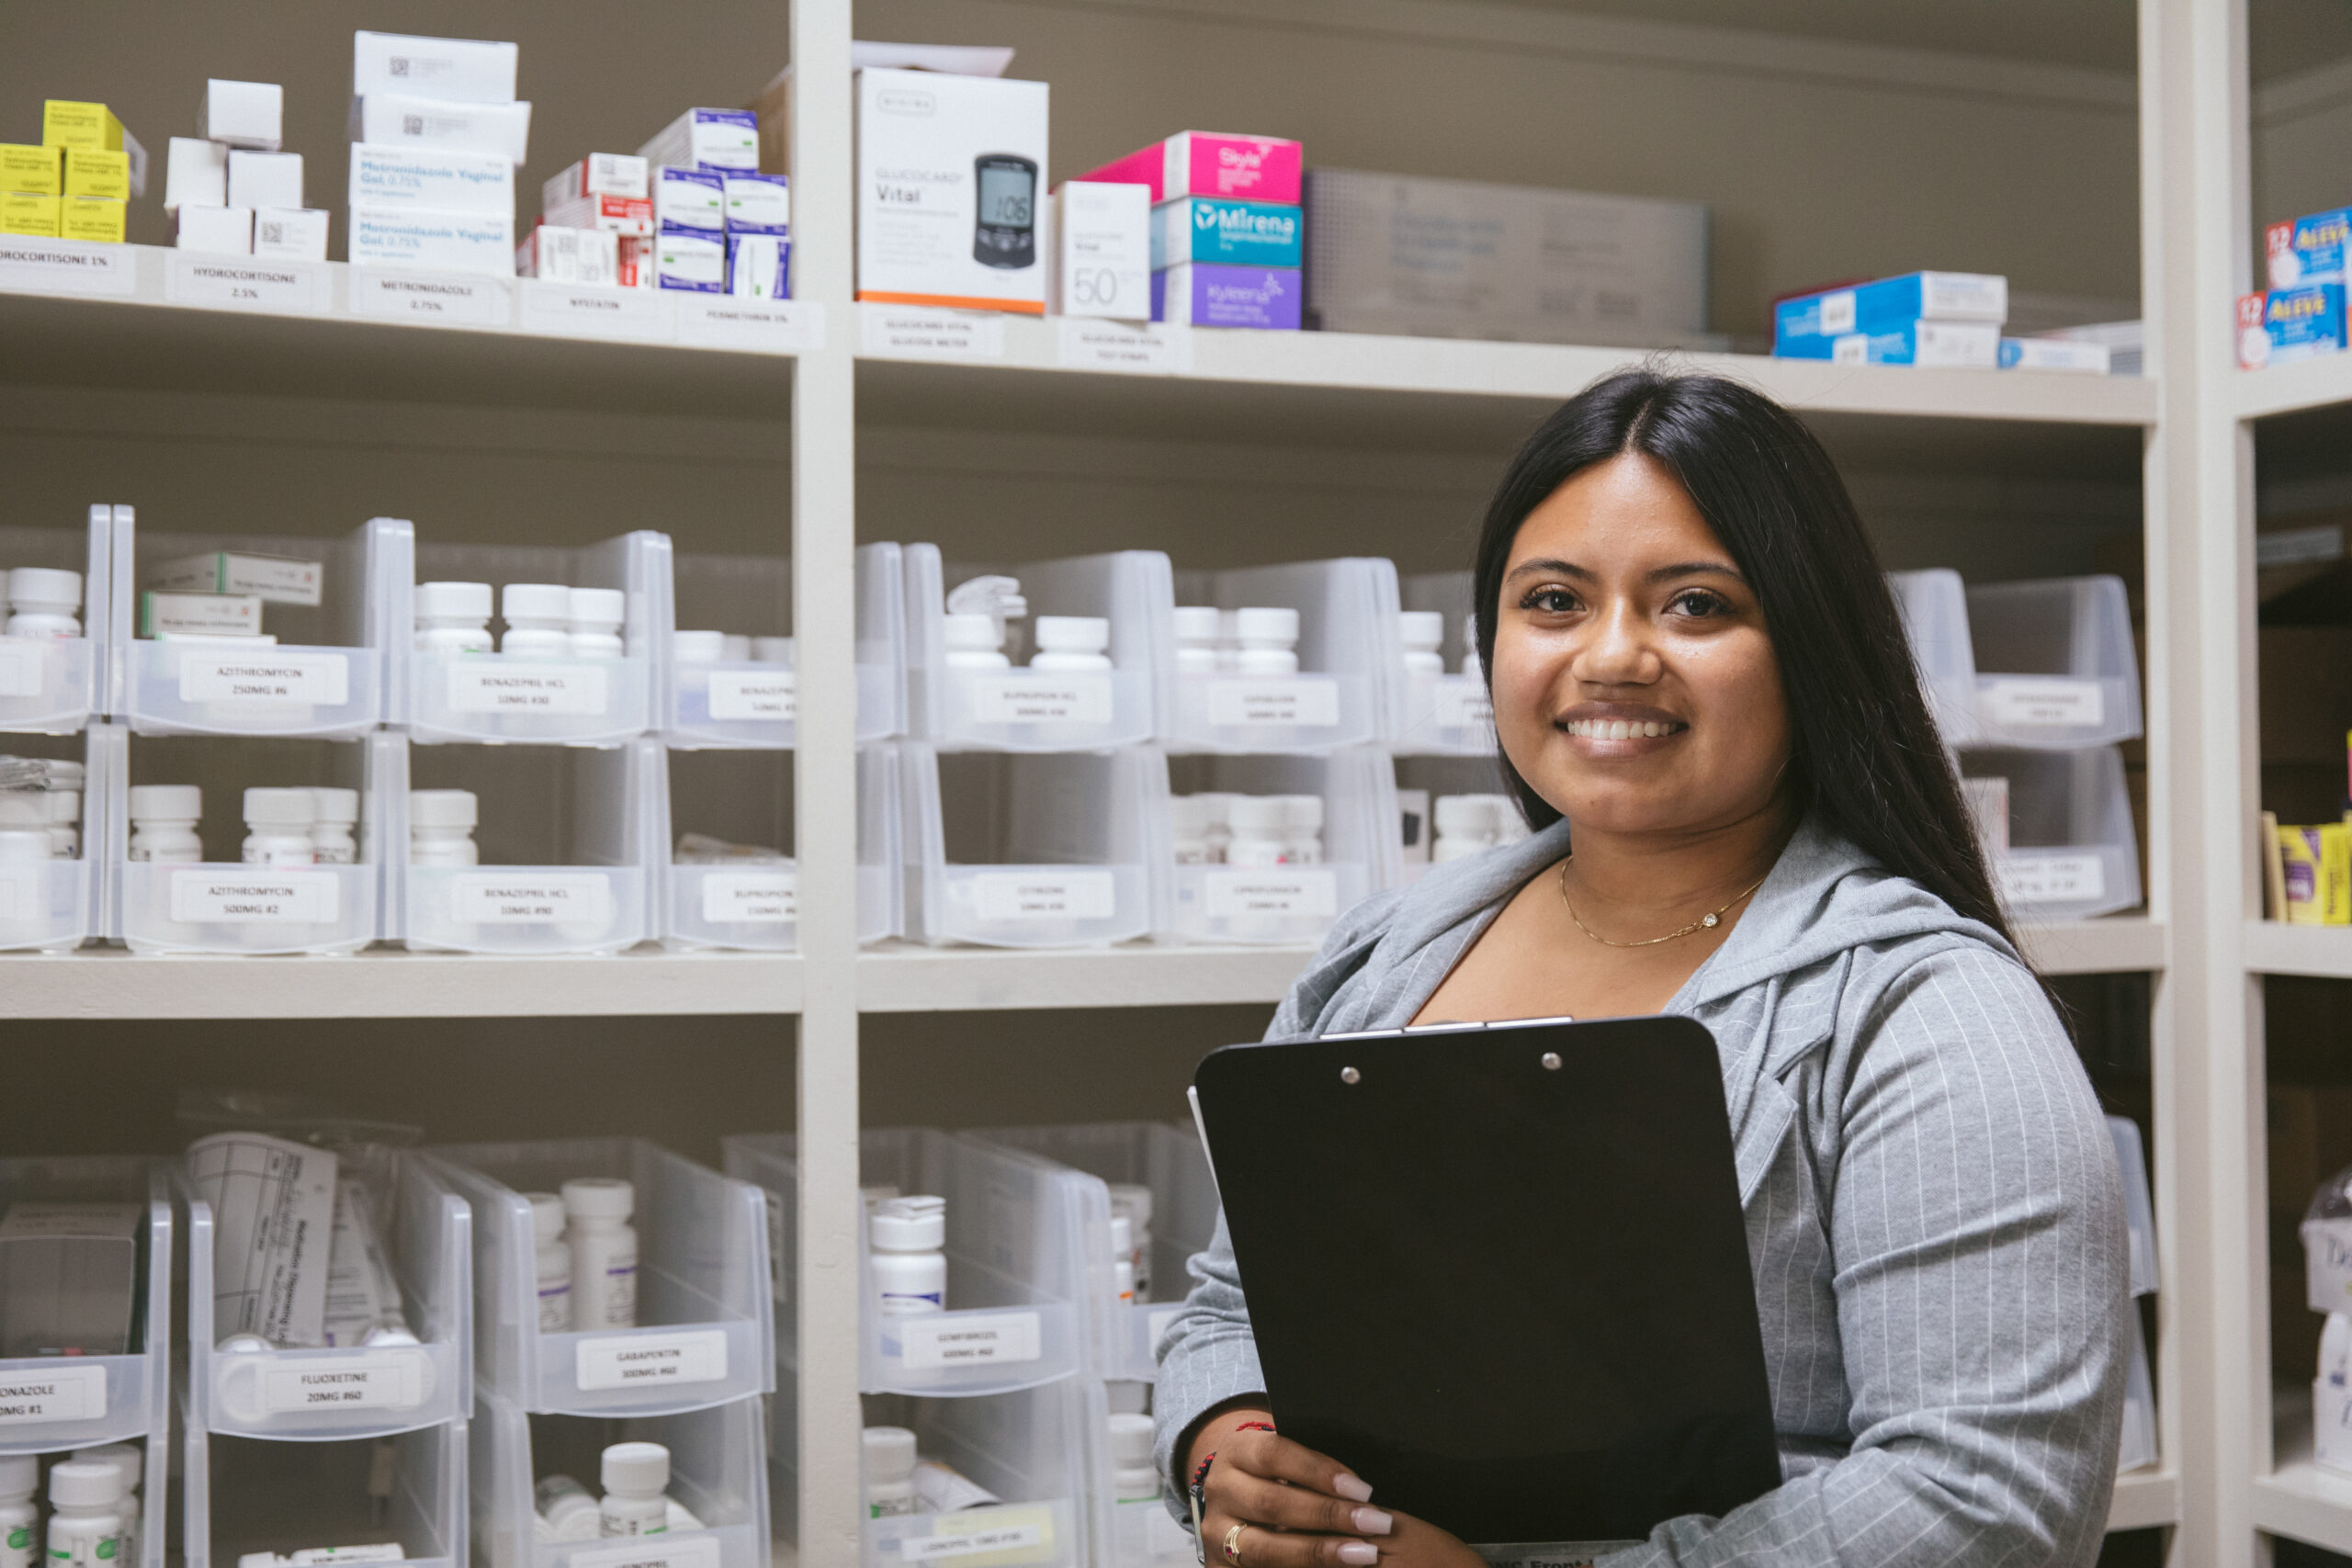 Healthcare Provider Ines Mendoza in the pharmacy of the Santa Barbara Neighborhood Clinics, in Goleta, California, on Friday, October 23, 2020. The Santa Barbara Neighborhood Clinics are among the hundreds of community health centers across the U.S. that received Bayer-donated IUDs to bolster reproductive health services for uninsured women. (Photo by Erin Feinblatt for Direct Relief)